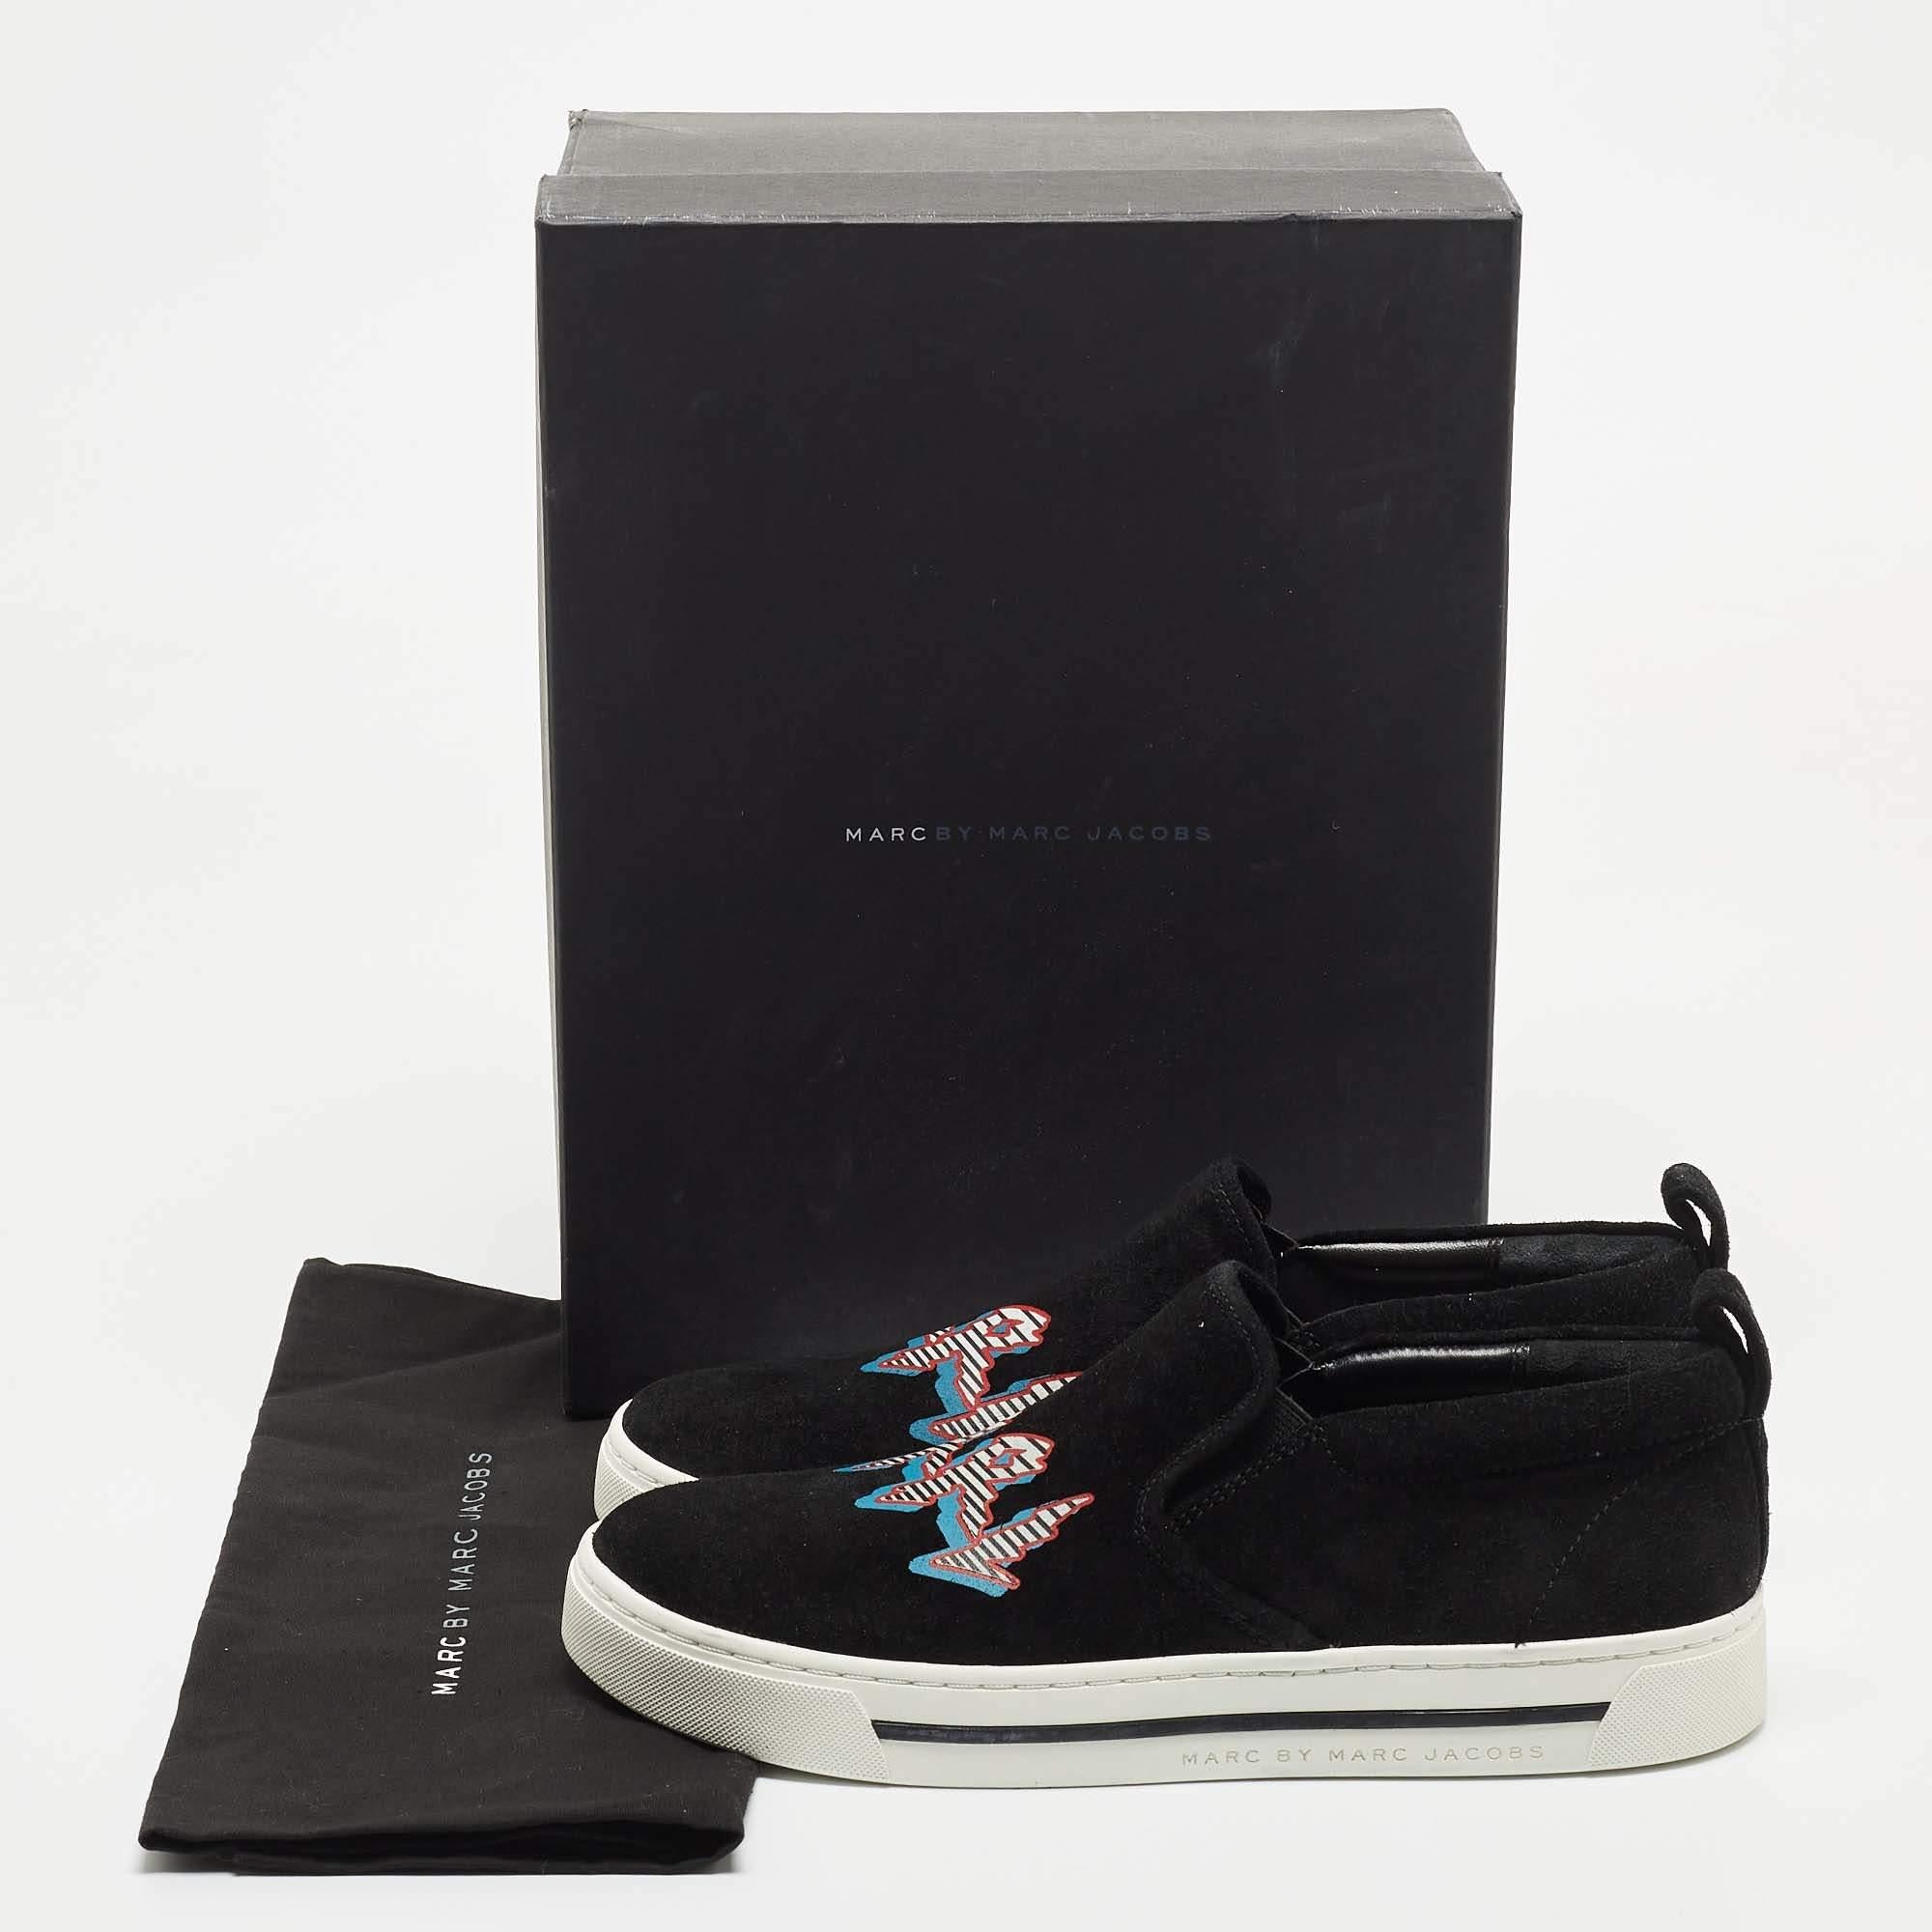 Marc By Marc Jacobs Black Suede GRRL Slip On Sneakers Size 37 4